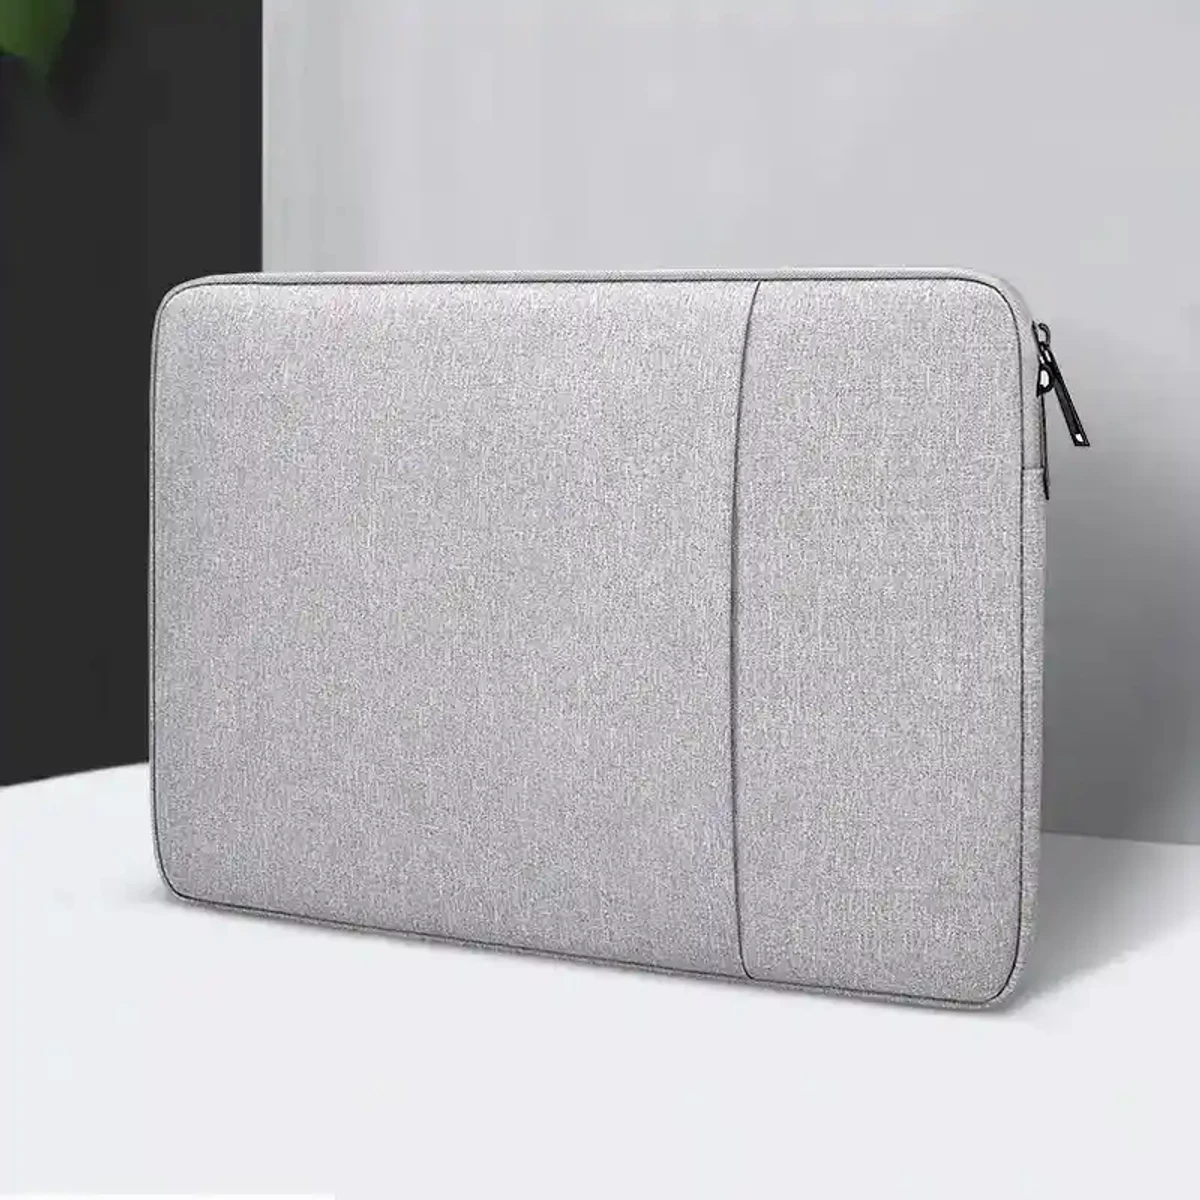 SLEEVE CASE FOR LAPTOP UP TO 15.4 INCHES BAG